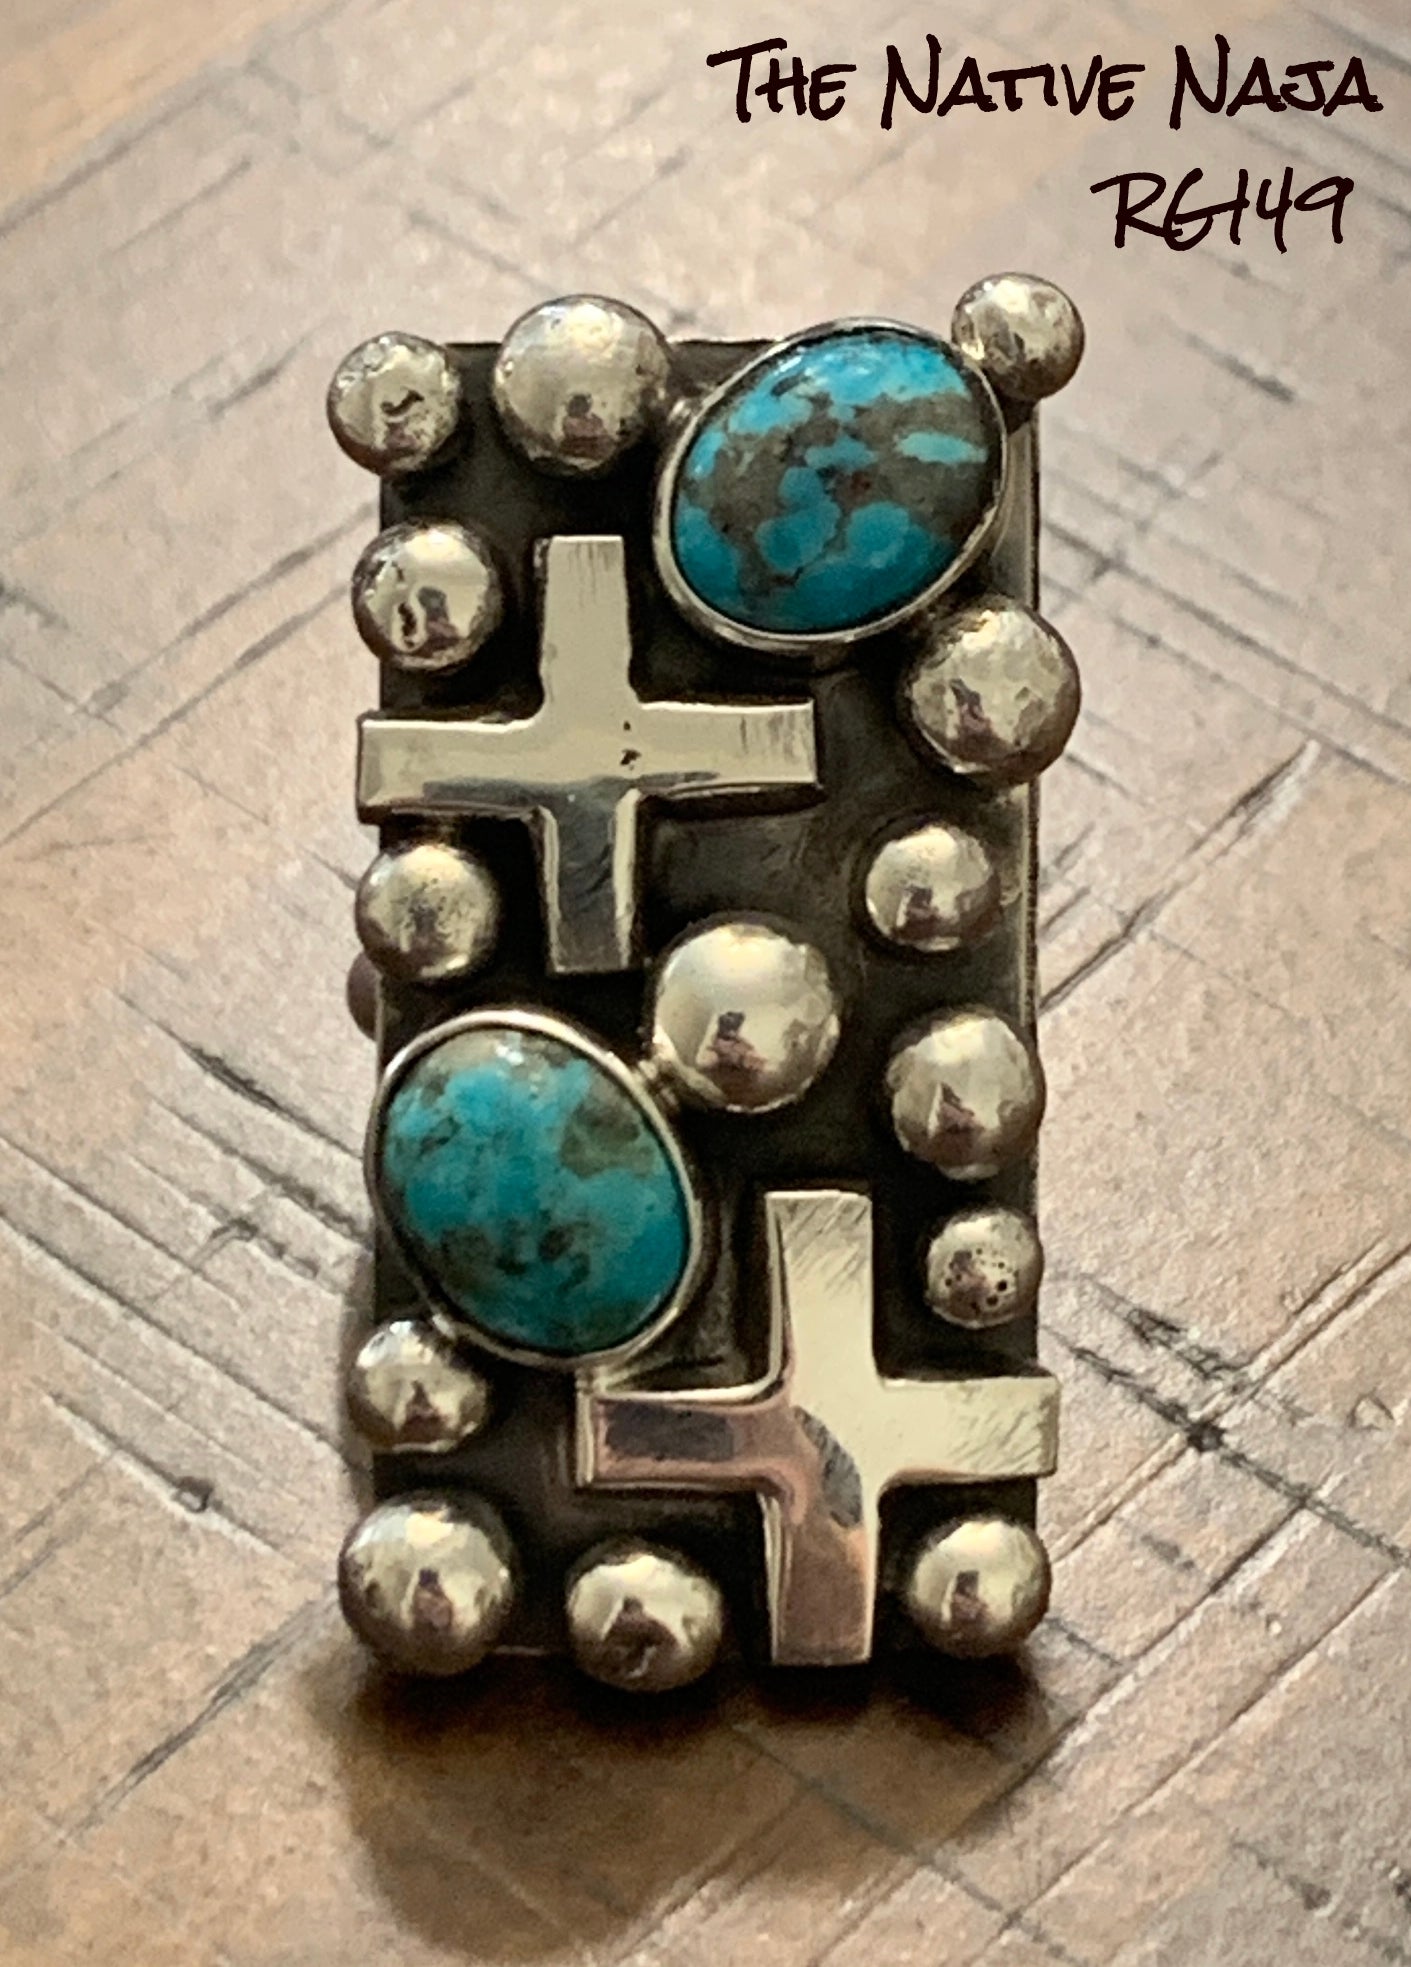 Chimney Butte Genuine Turquoise & Silver Cross & Dot Ring Size 7 1/2 RG149